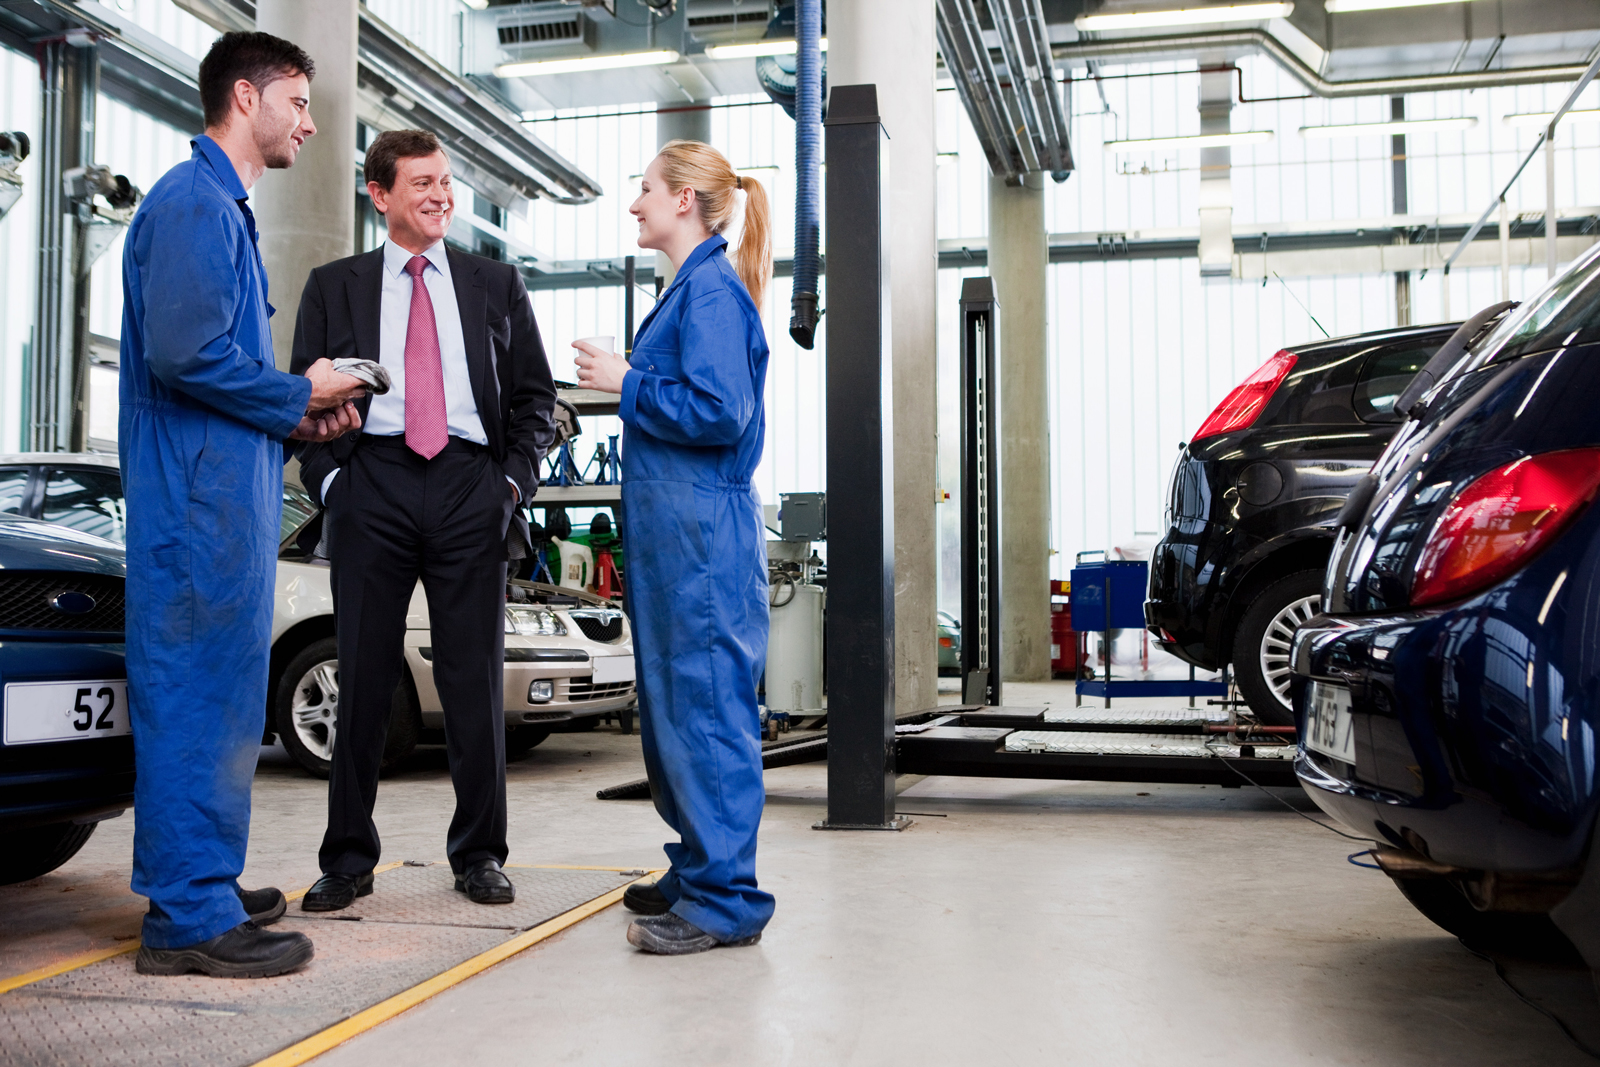 A motor trade business owner talking to two employee's in a car workshop